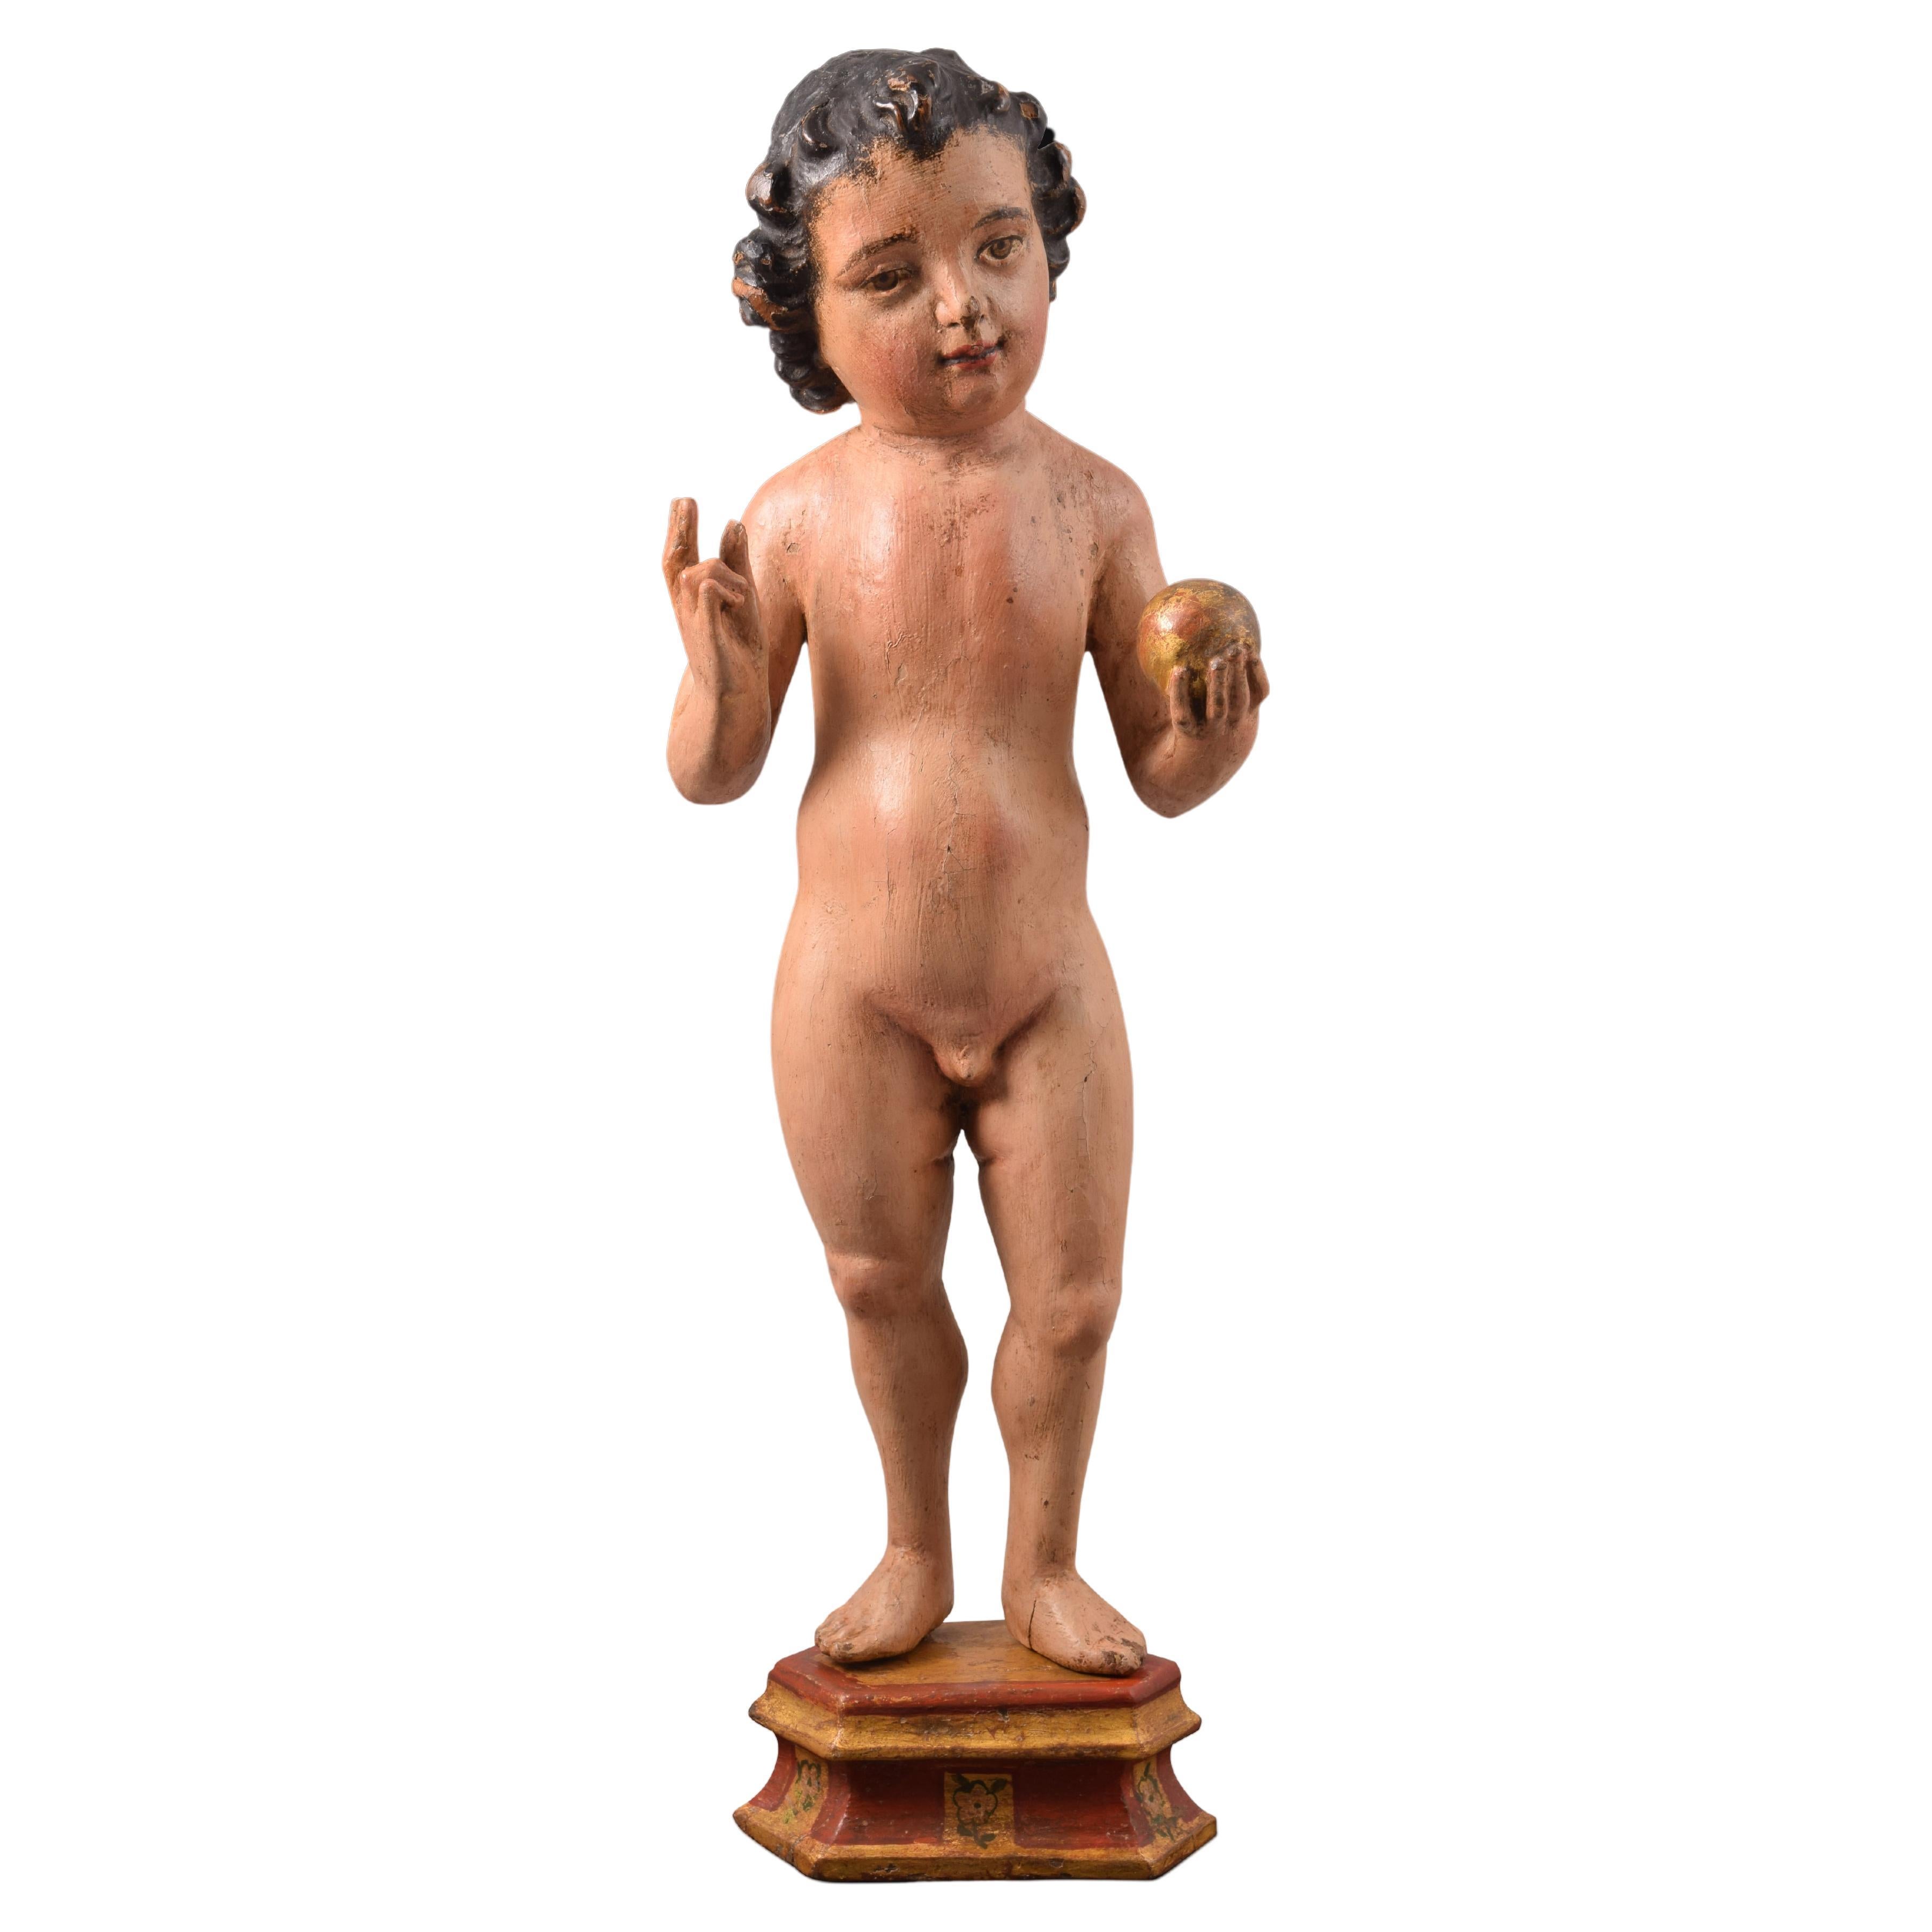 Child Jesus Savior of the World. Wood. Flemish school, 16th century and later. For Sale